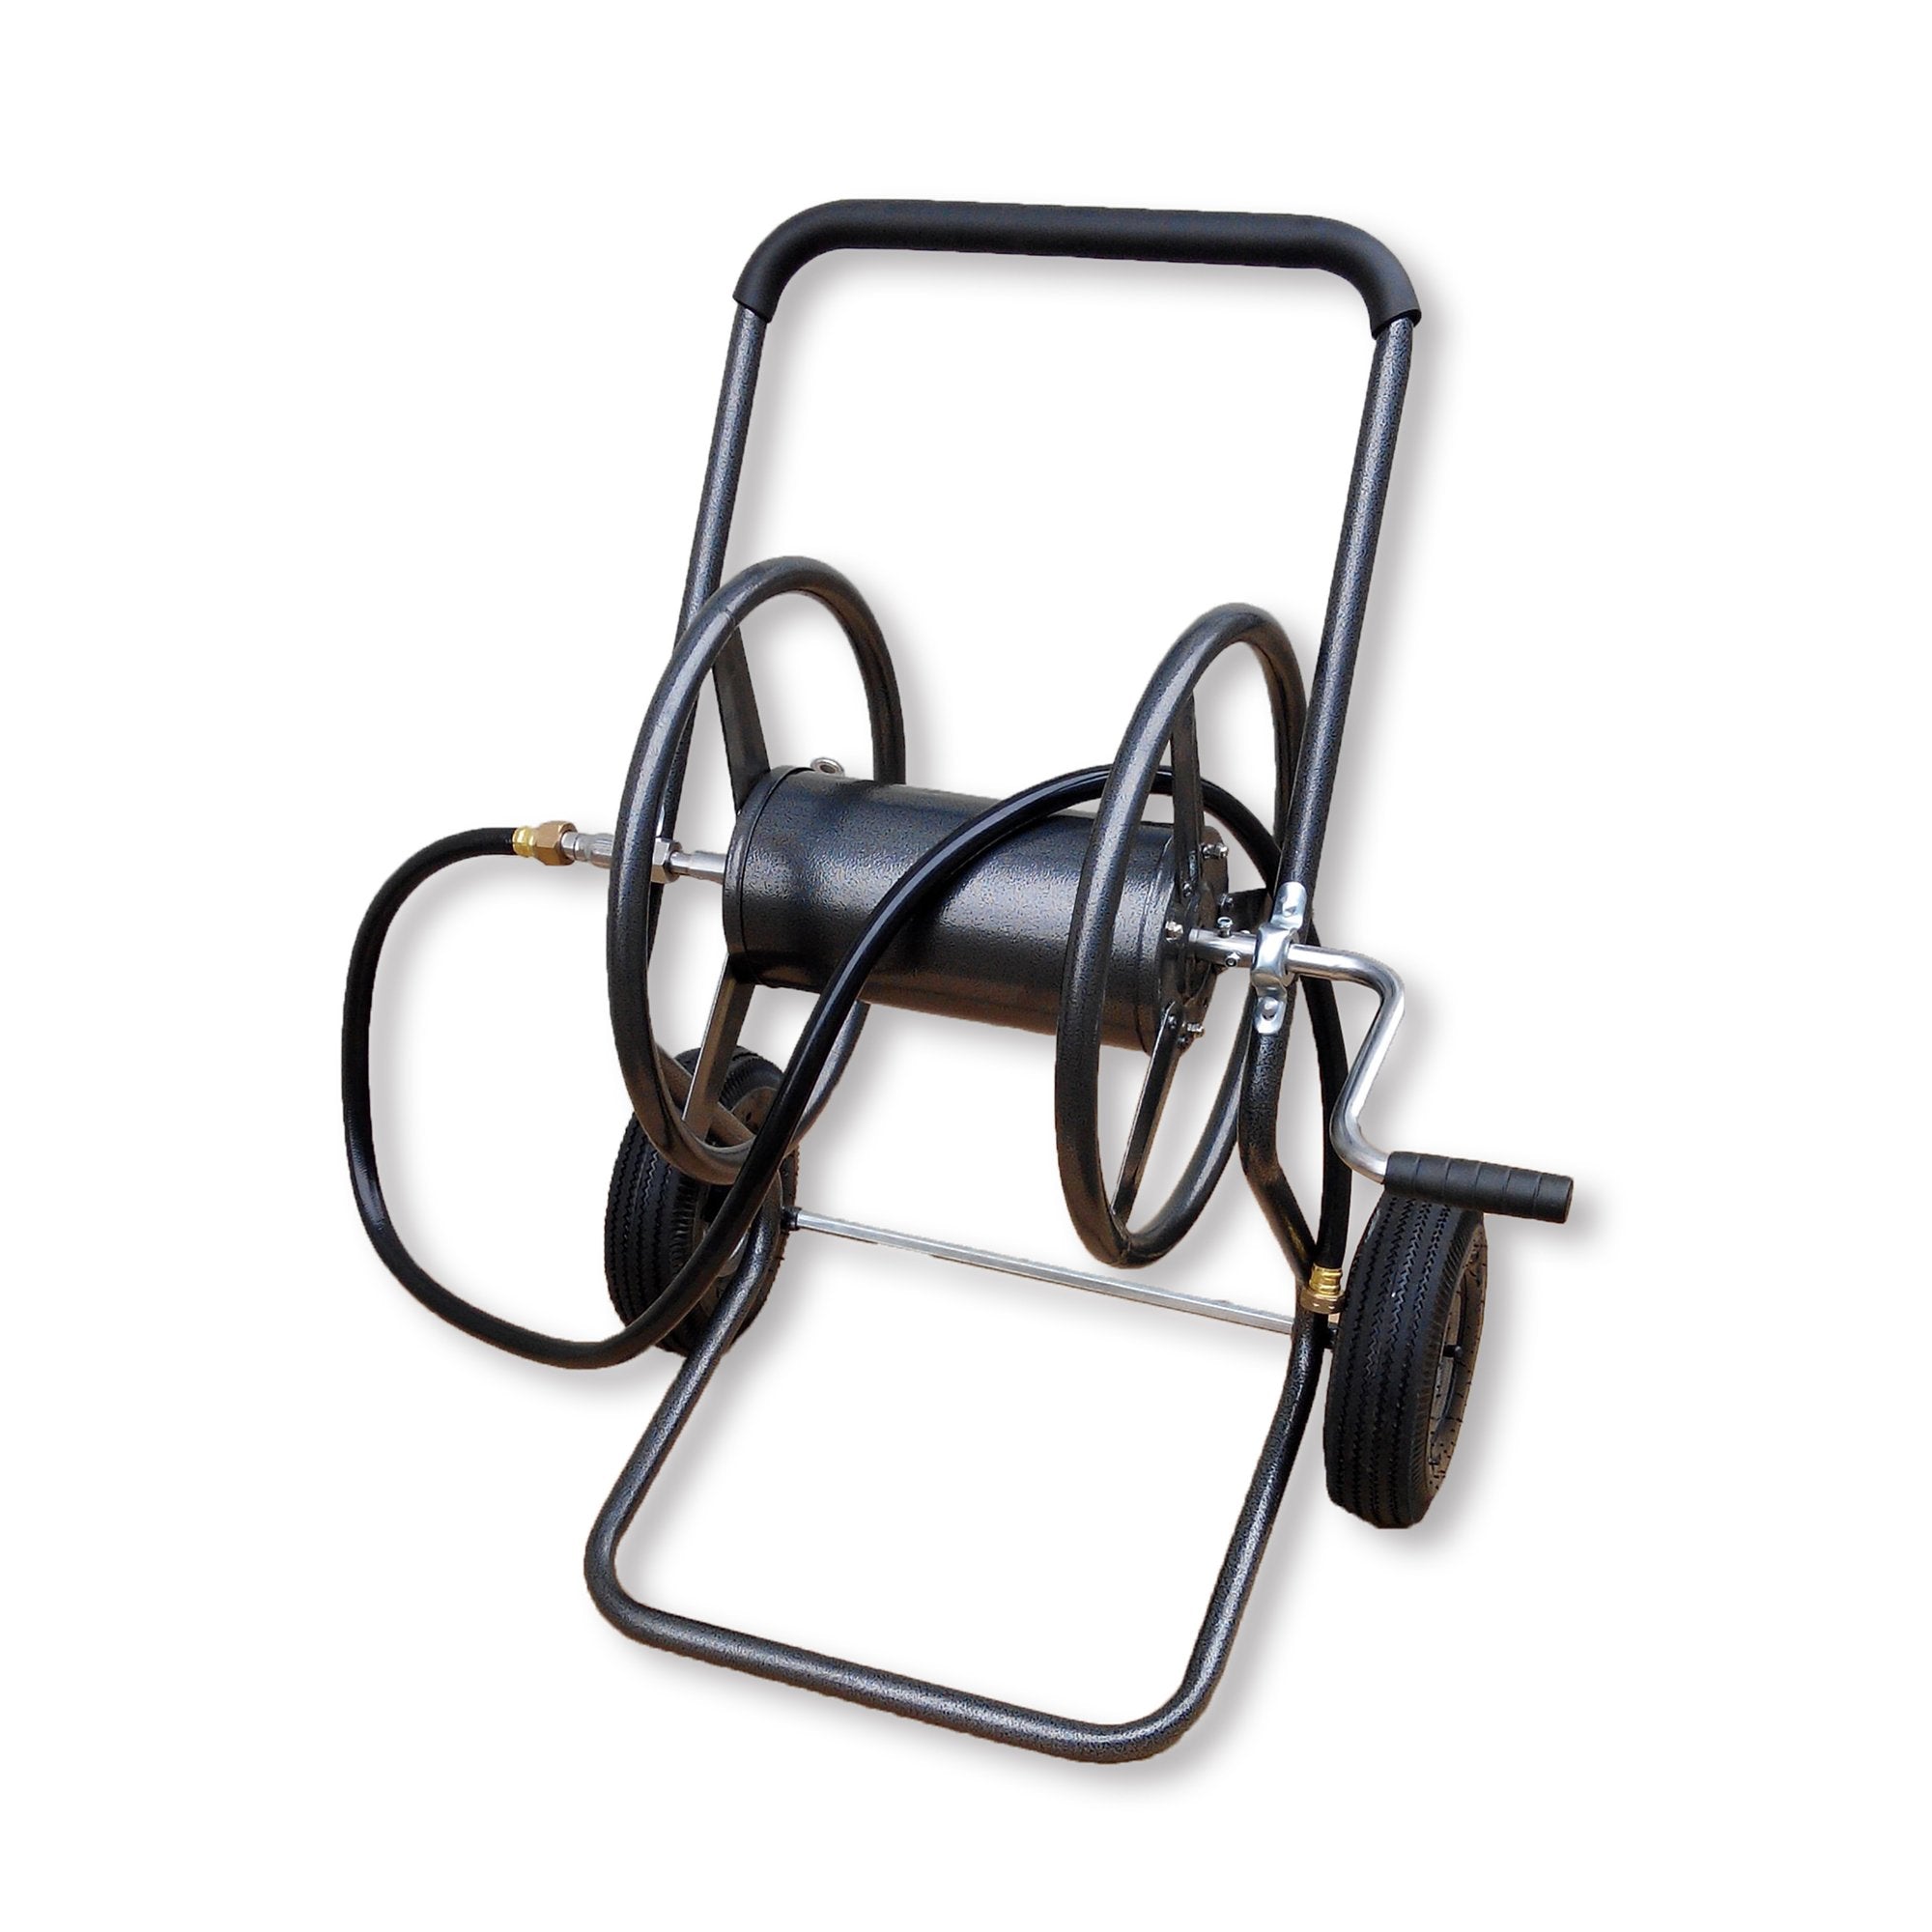 Hose Reel Cart Replacement Parts - Search Shopping